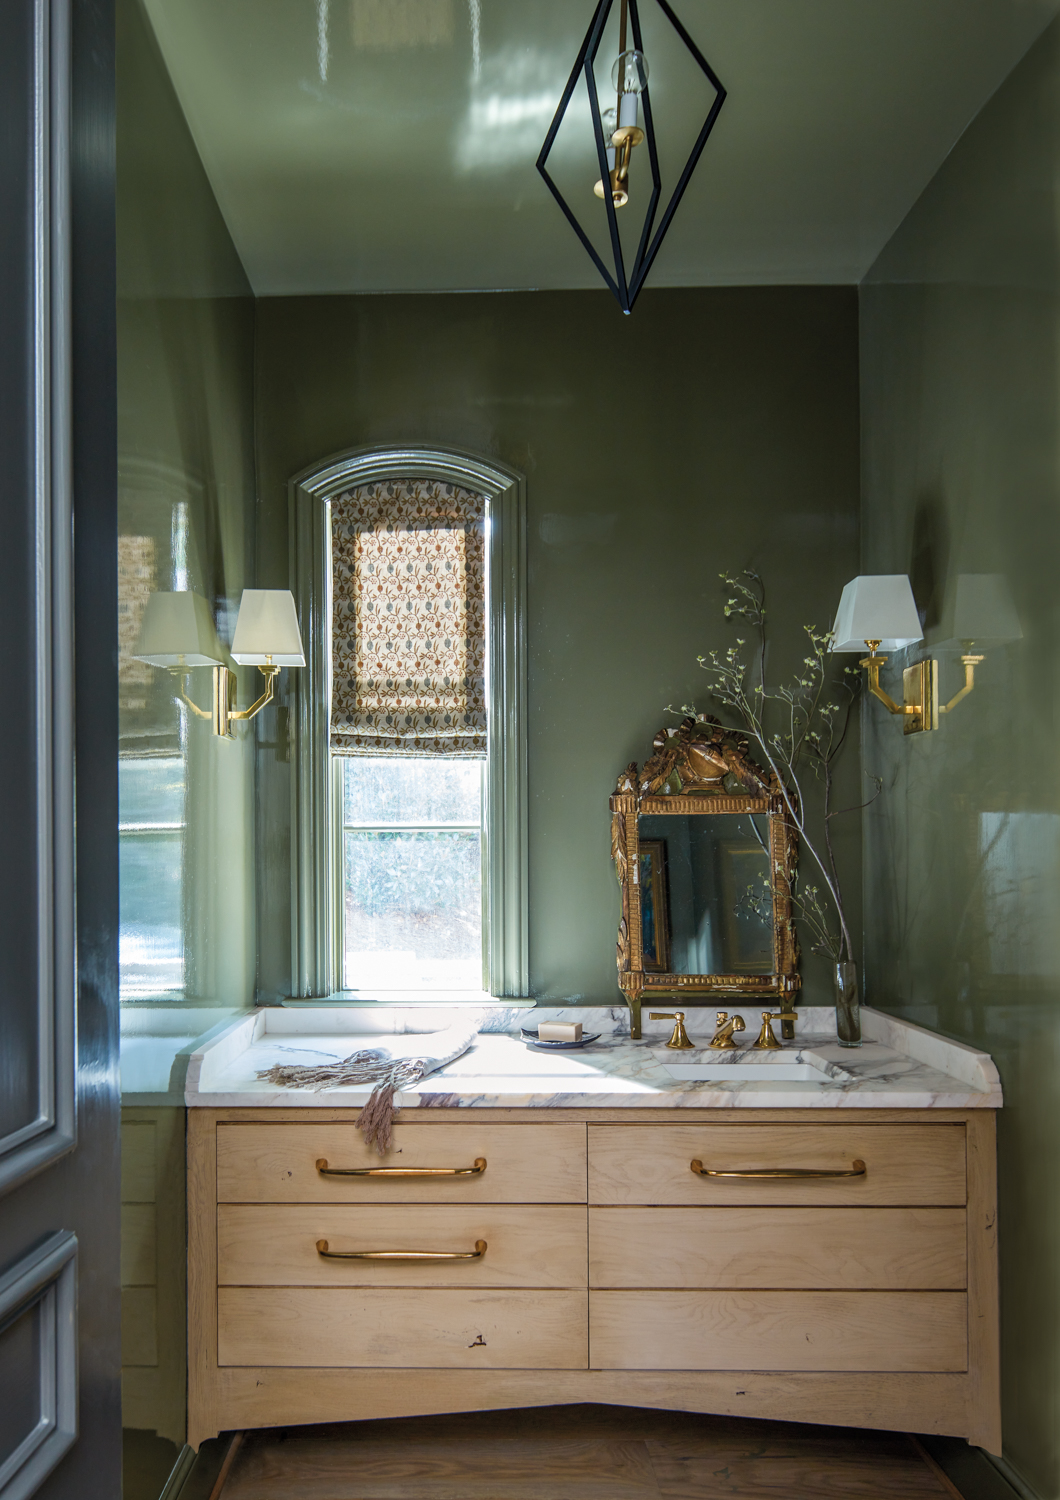 small glossy green bathroom with white oak cabinetry and ornate gilt mirror